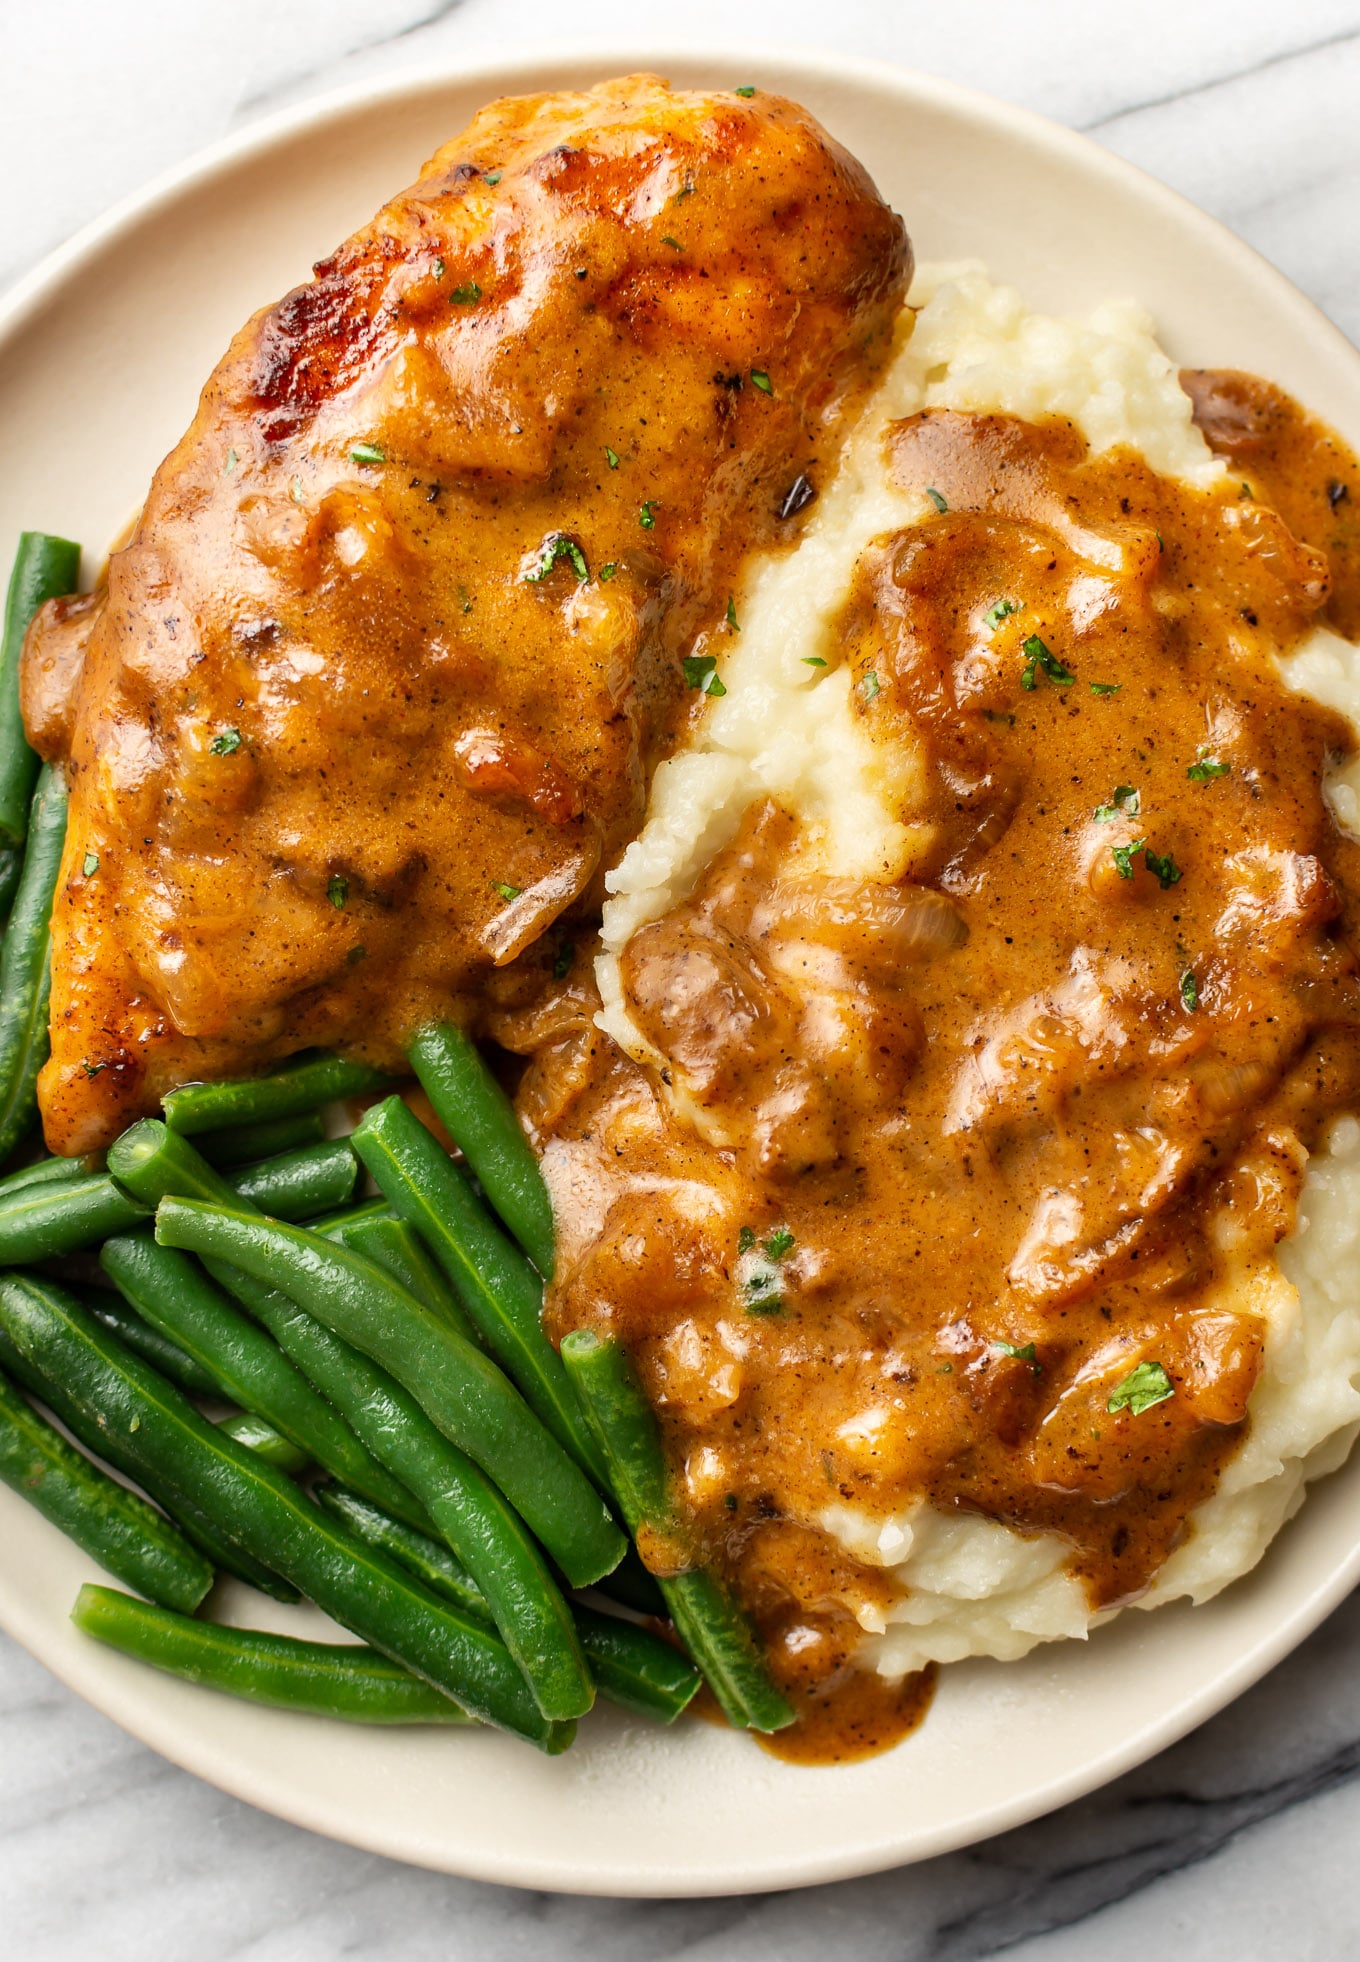 Top 3 Smothered Chicken Recipes